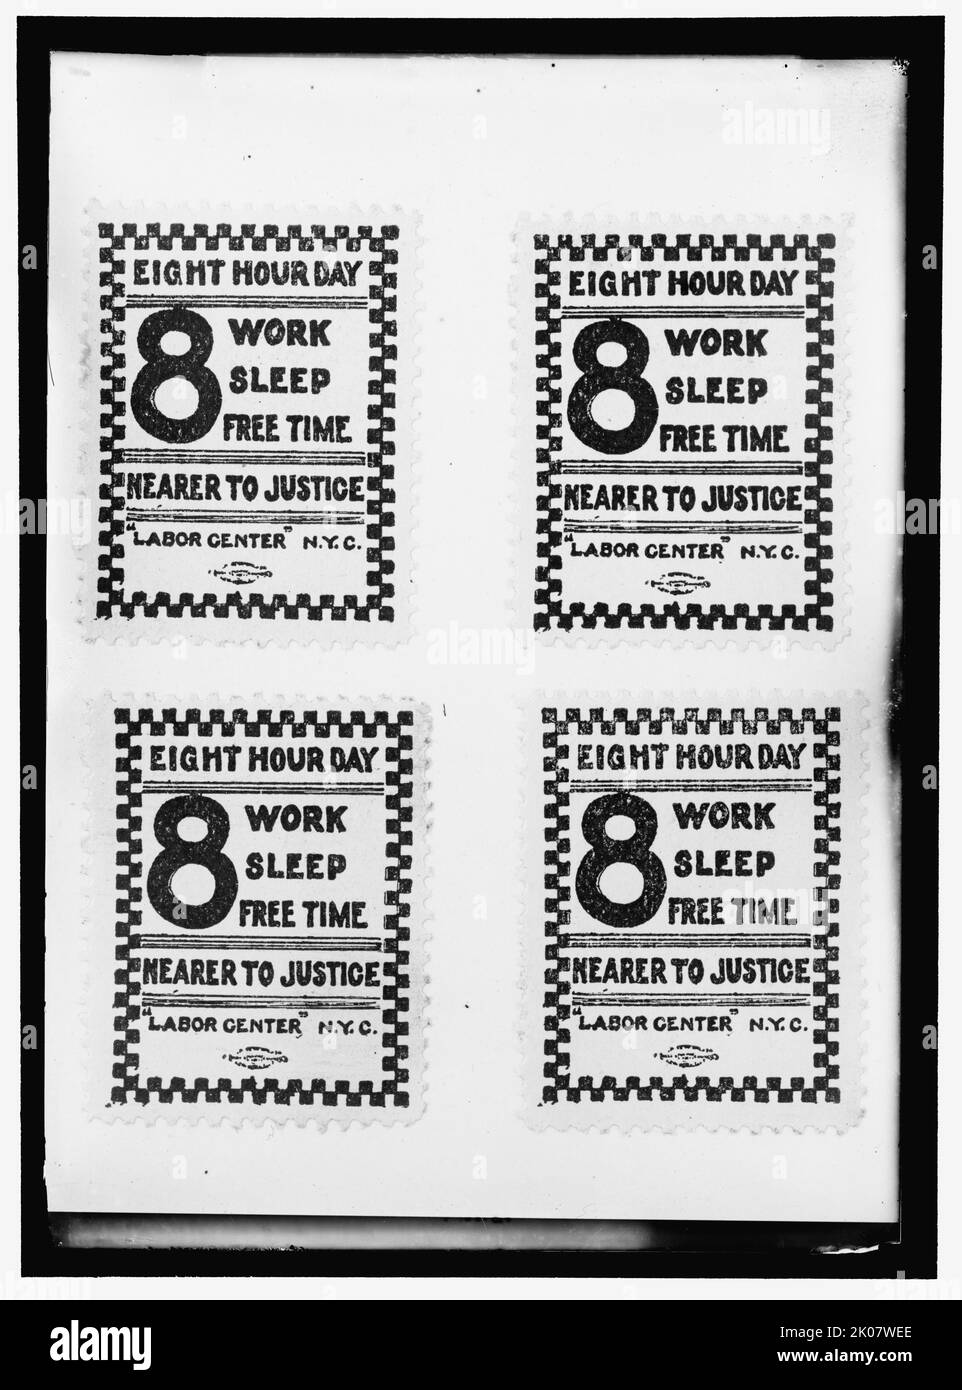 8 hour day signs, between 1910 and 1917. New York, USA. Stamps promoting realistic working hours. 'Eight Hour Day - Work; Sleep; Free Time; Nearer to Justice; &quot;Labor Center&quot; N.Y.C.' Stock Photo